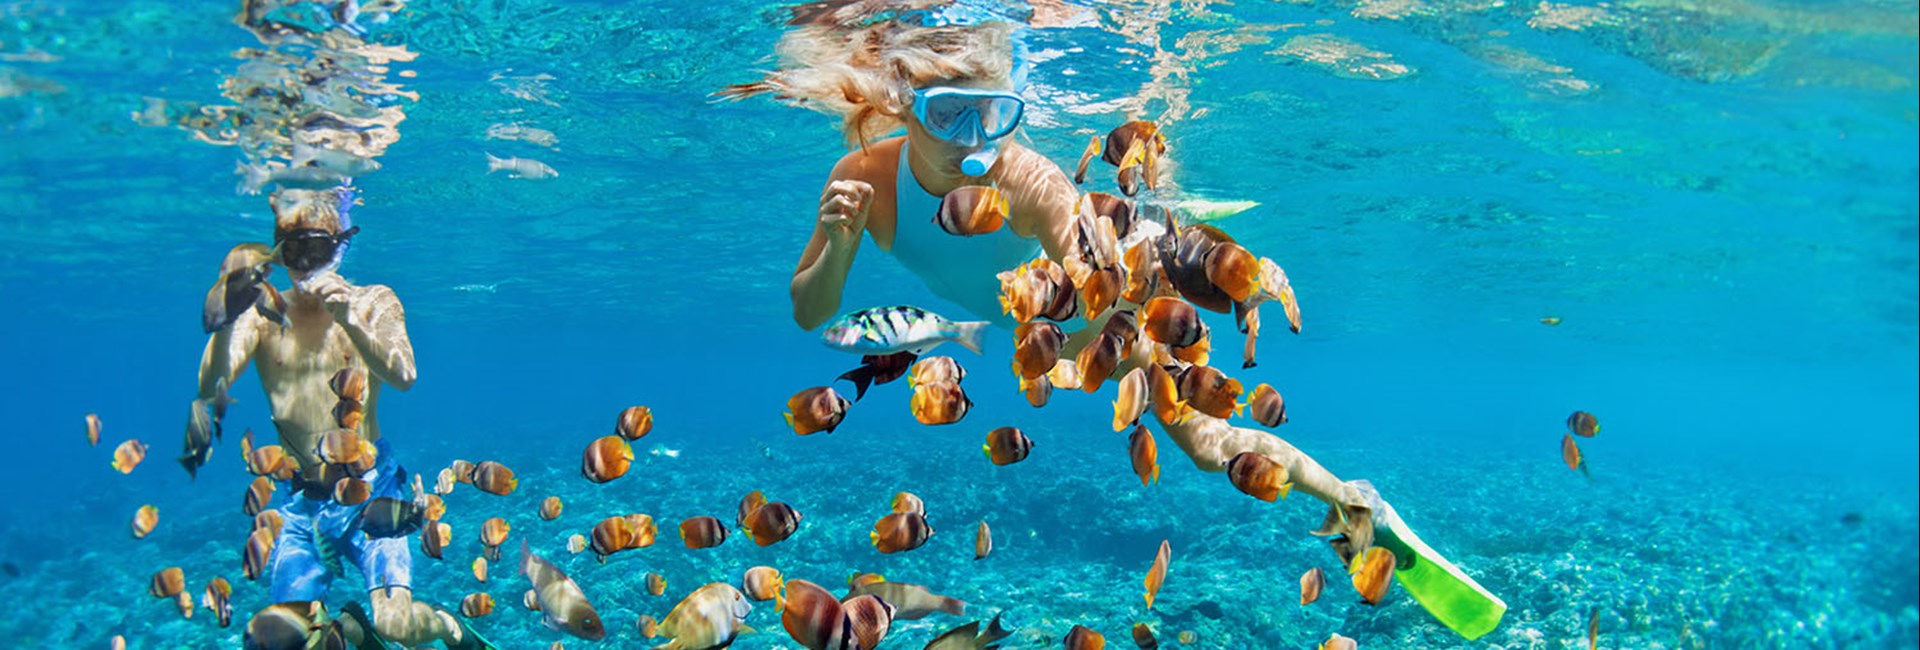 Woman and man snorkelling with colourful fish in tropical water